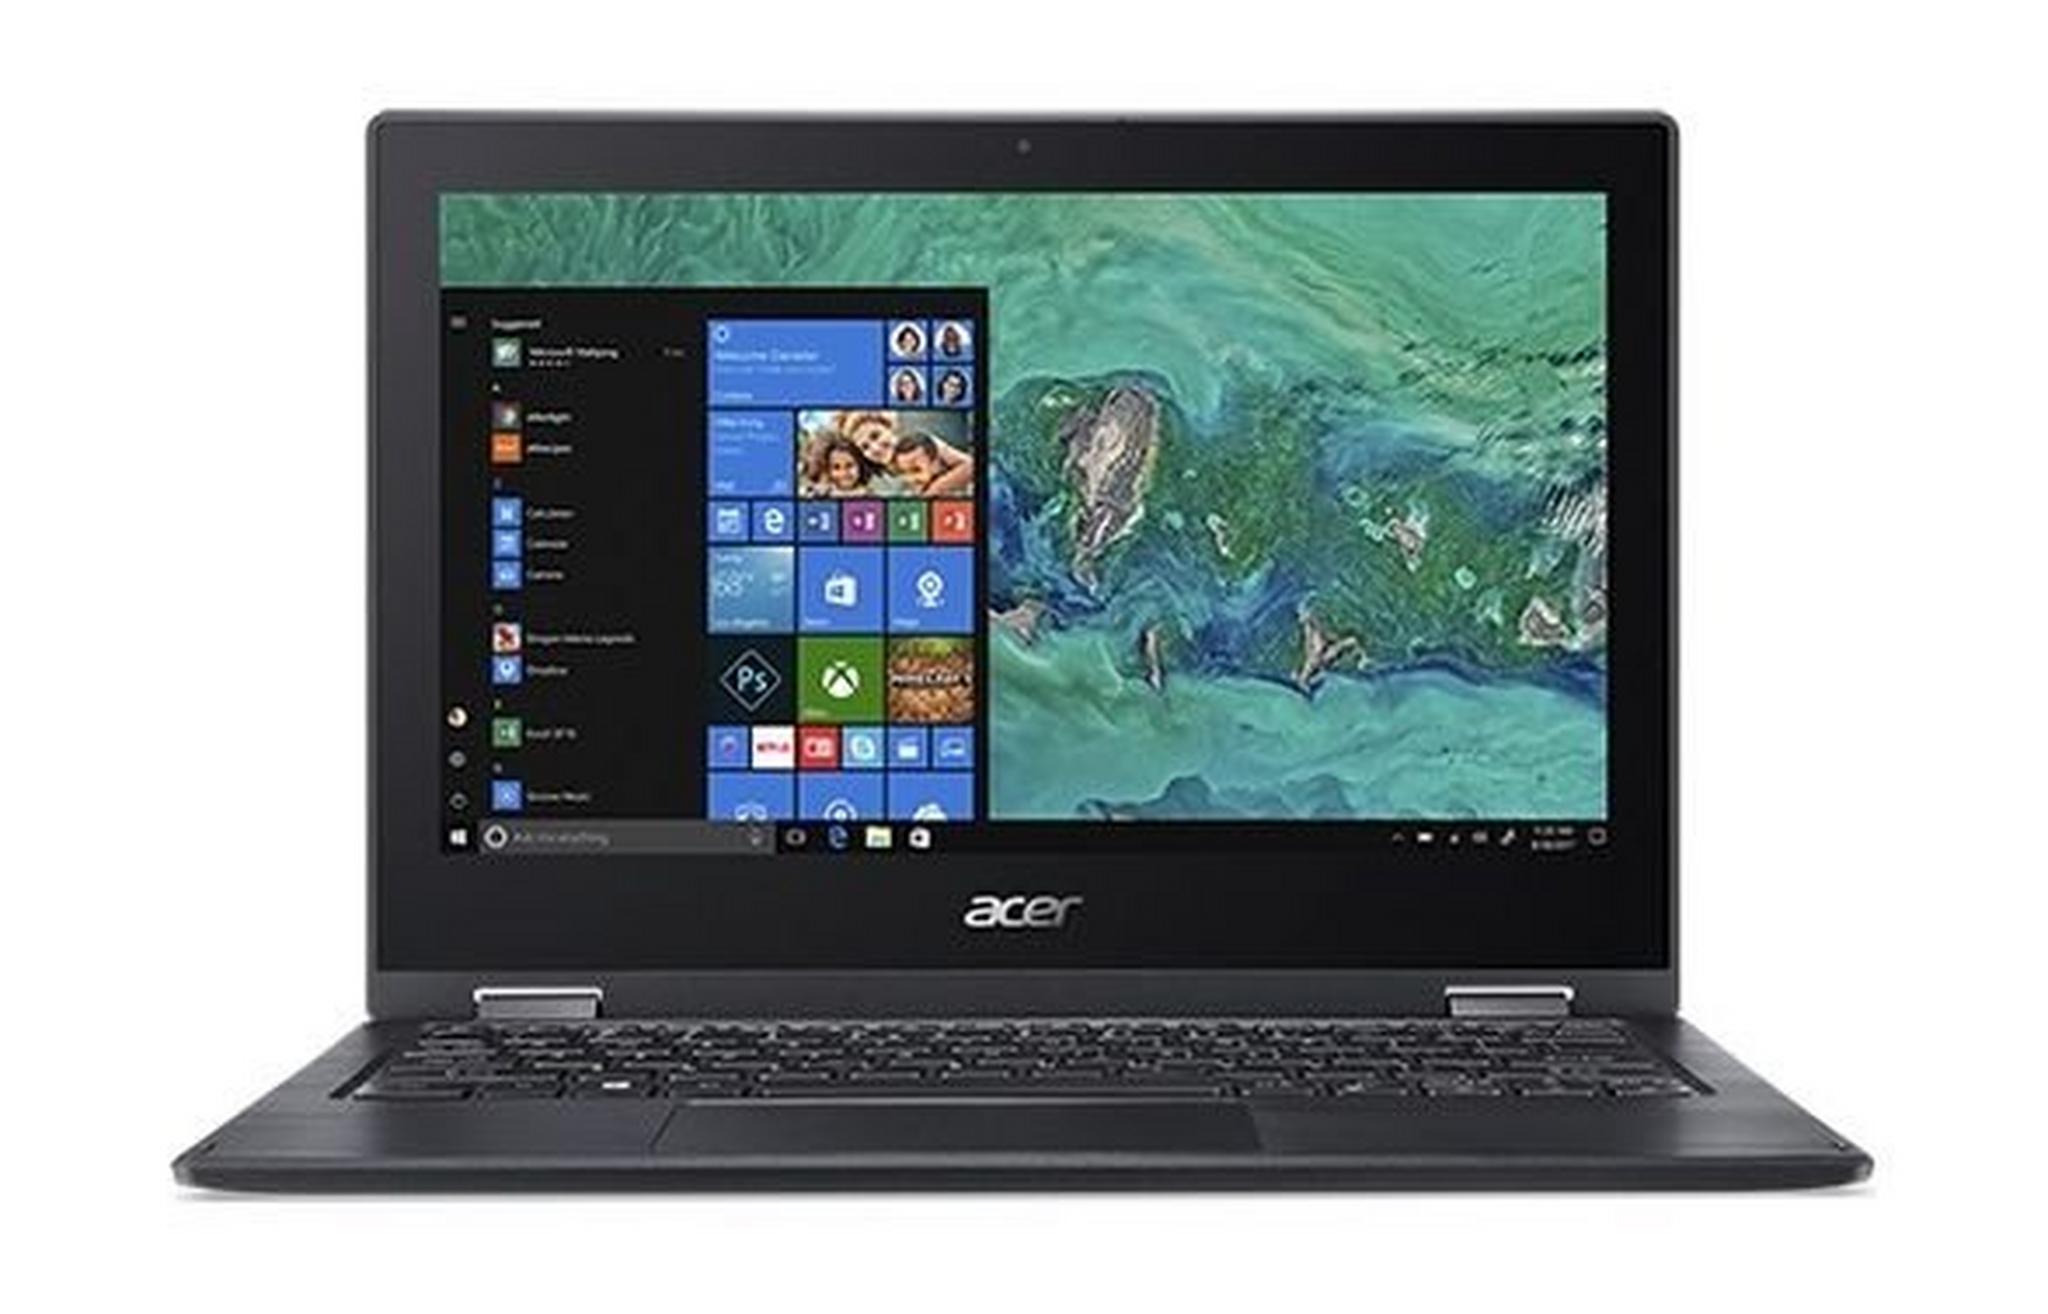 Acer Spin 1 Pentium Silver N5000 4GB RAM 500GB HDD 11.6 inch Touchscreen Convertible Laptop - Black